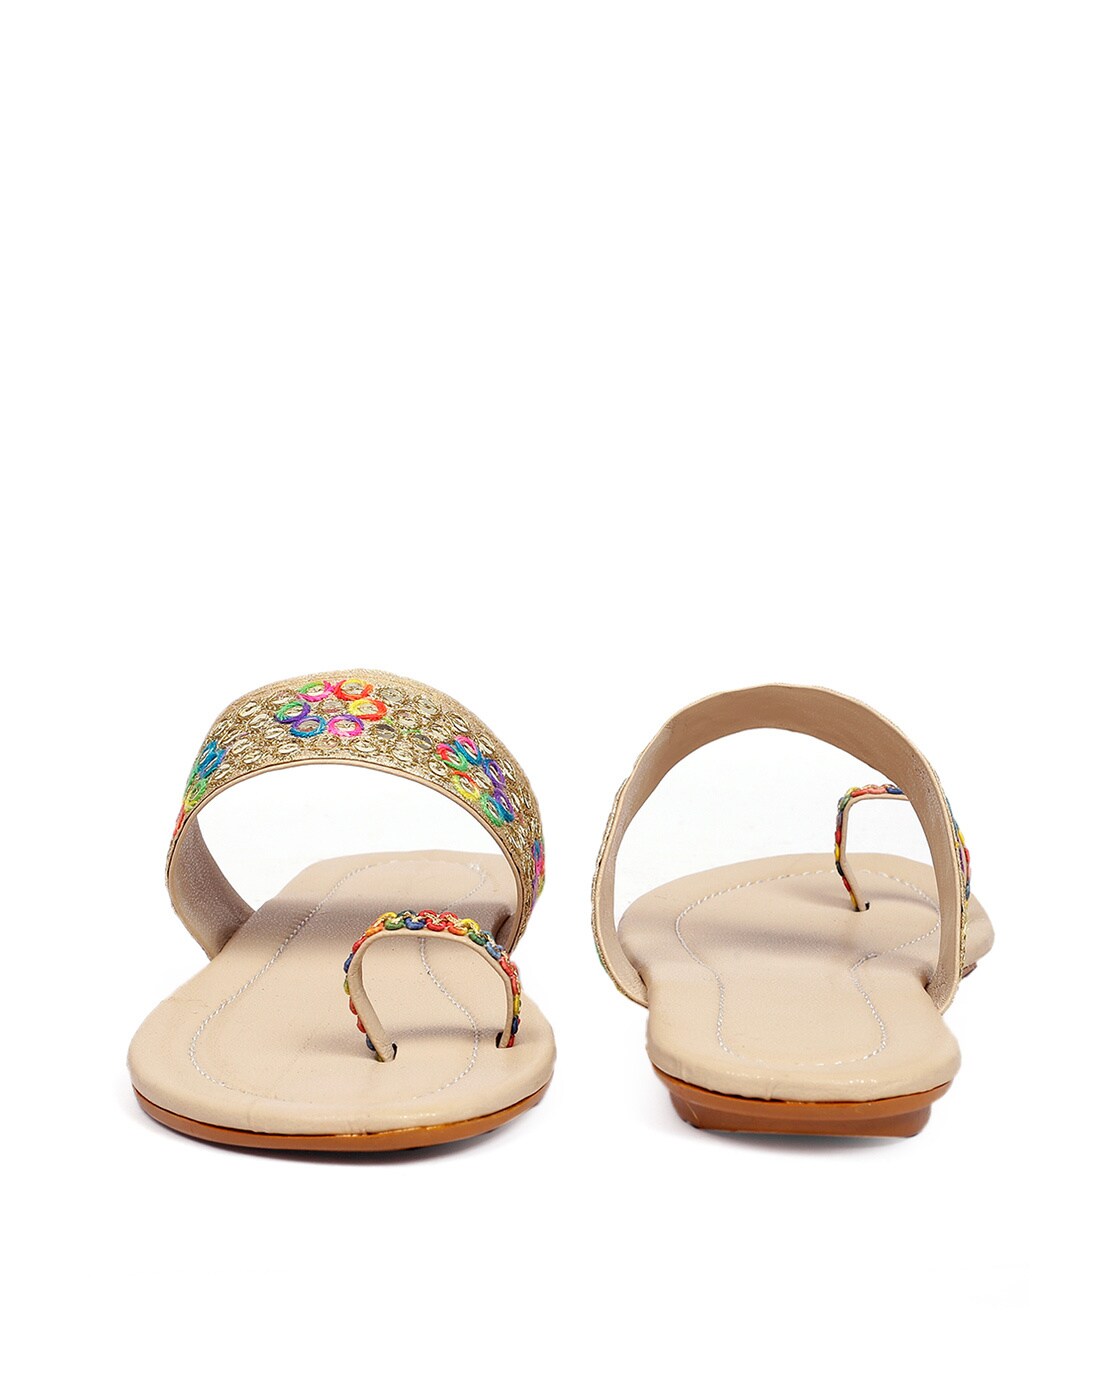 12 Wedding-Guest Sandals Stylists Always Recommend | HuffPost Life